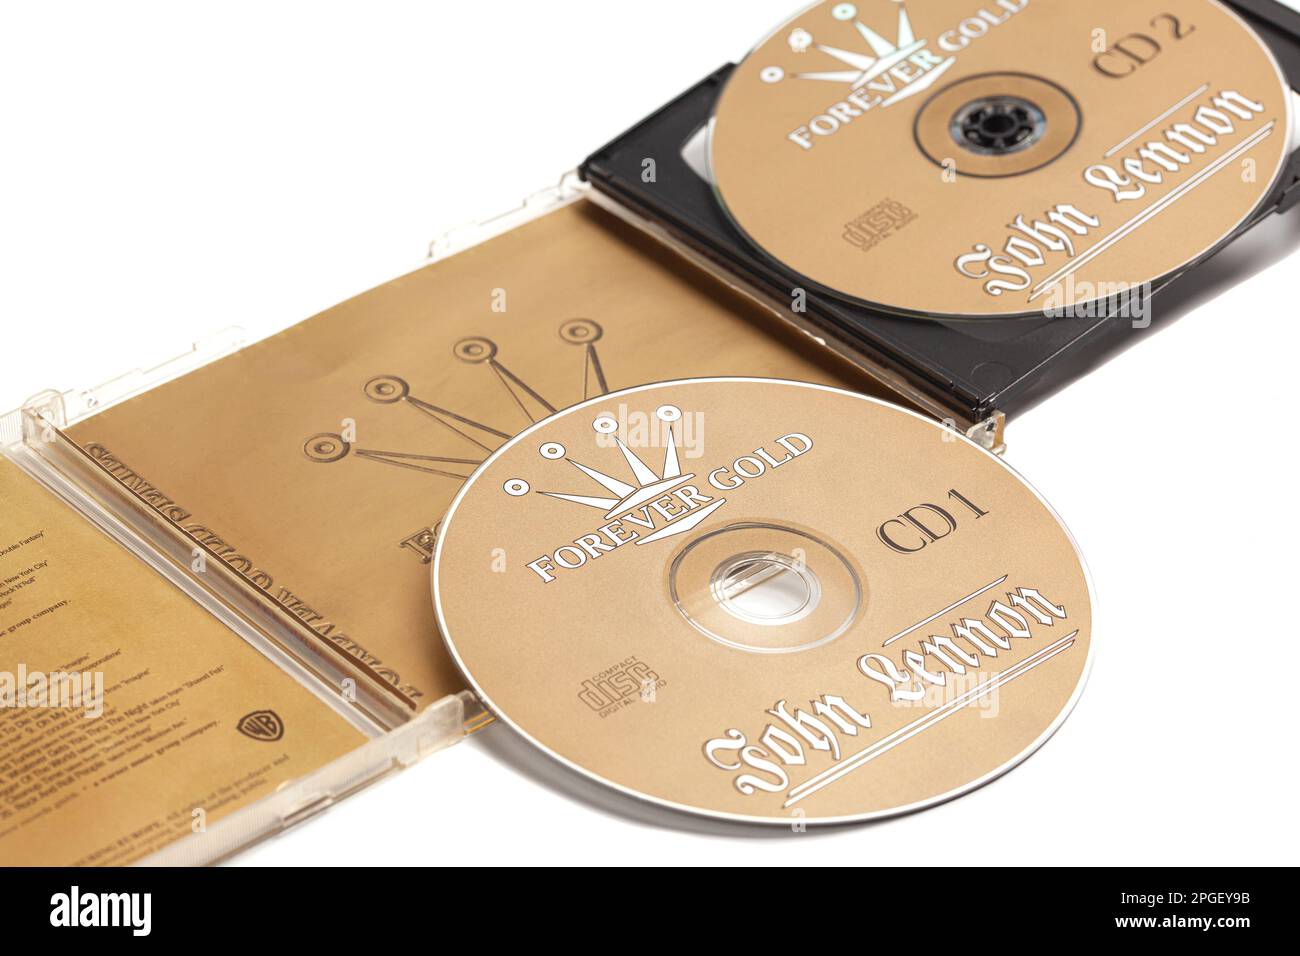 Moscow, Russia, 22 March 2023: CD discs by John Lennon - Forever Gold Stock Photo